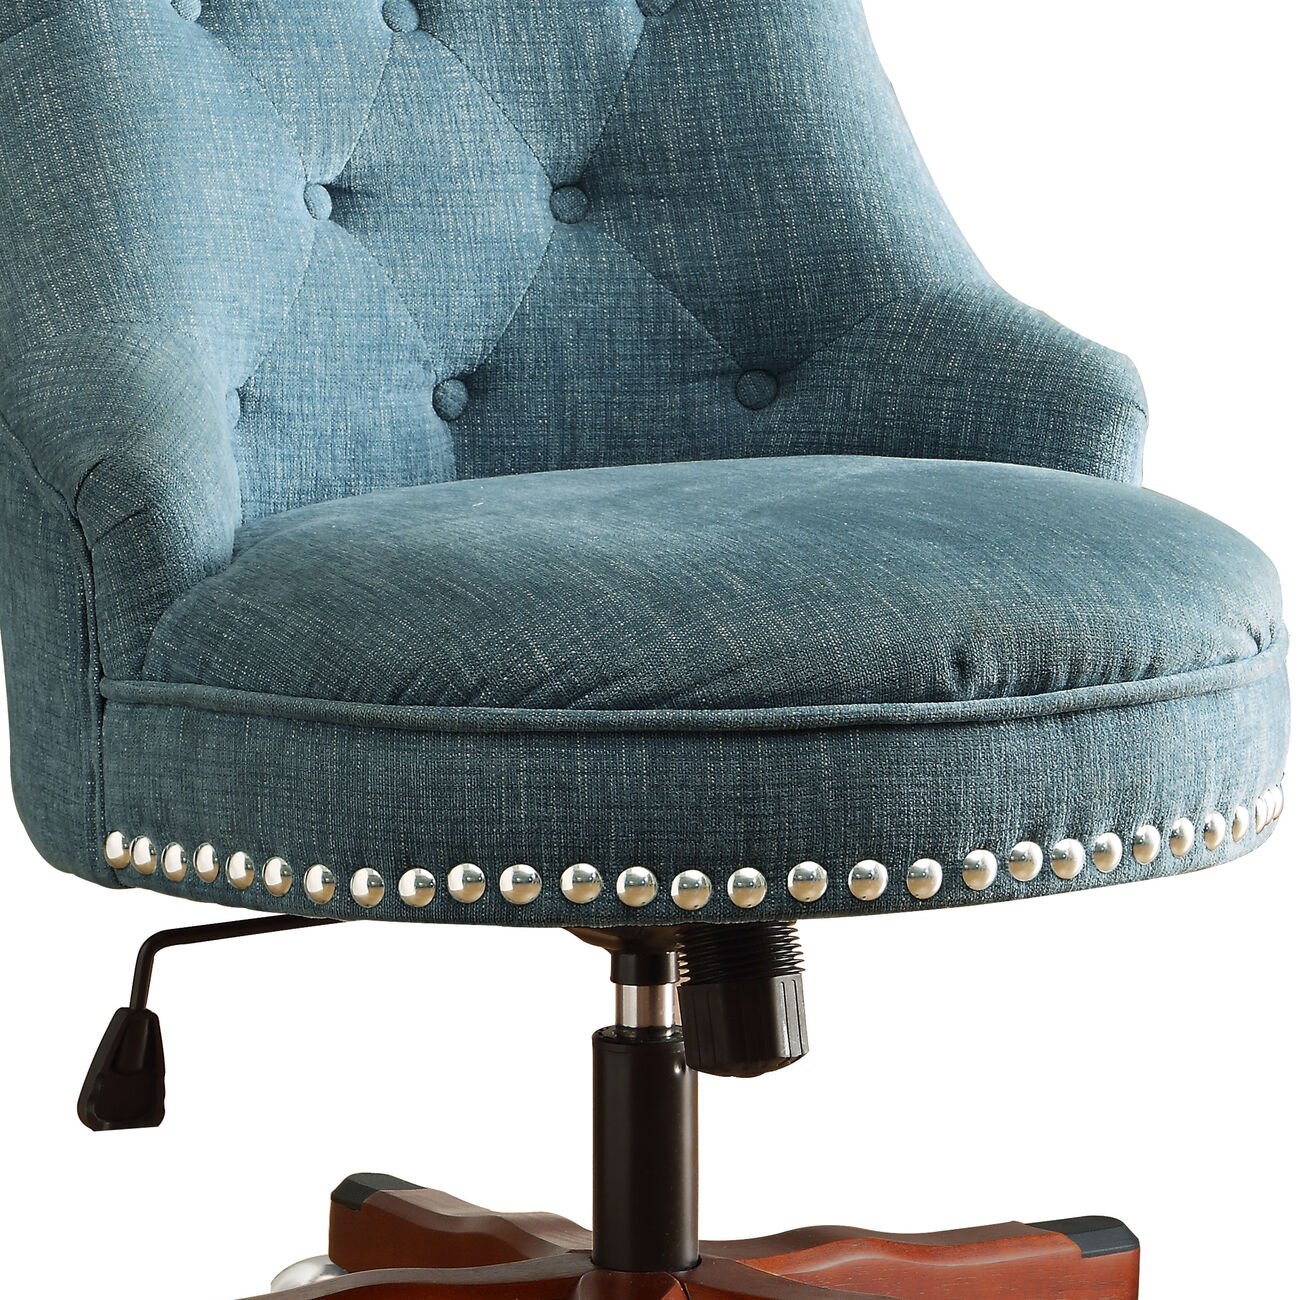 Wooden Swivel Office Chair with Button Tufted Backrest, Blue and Brown